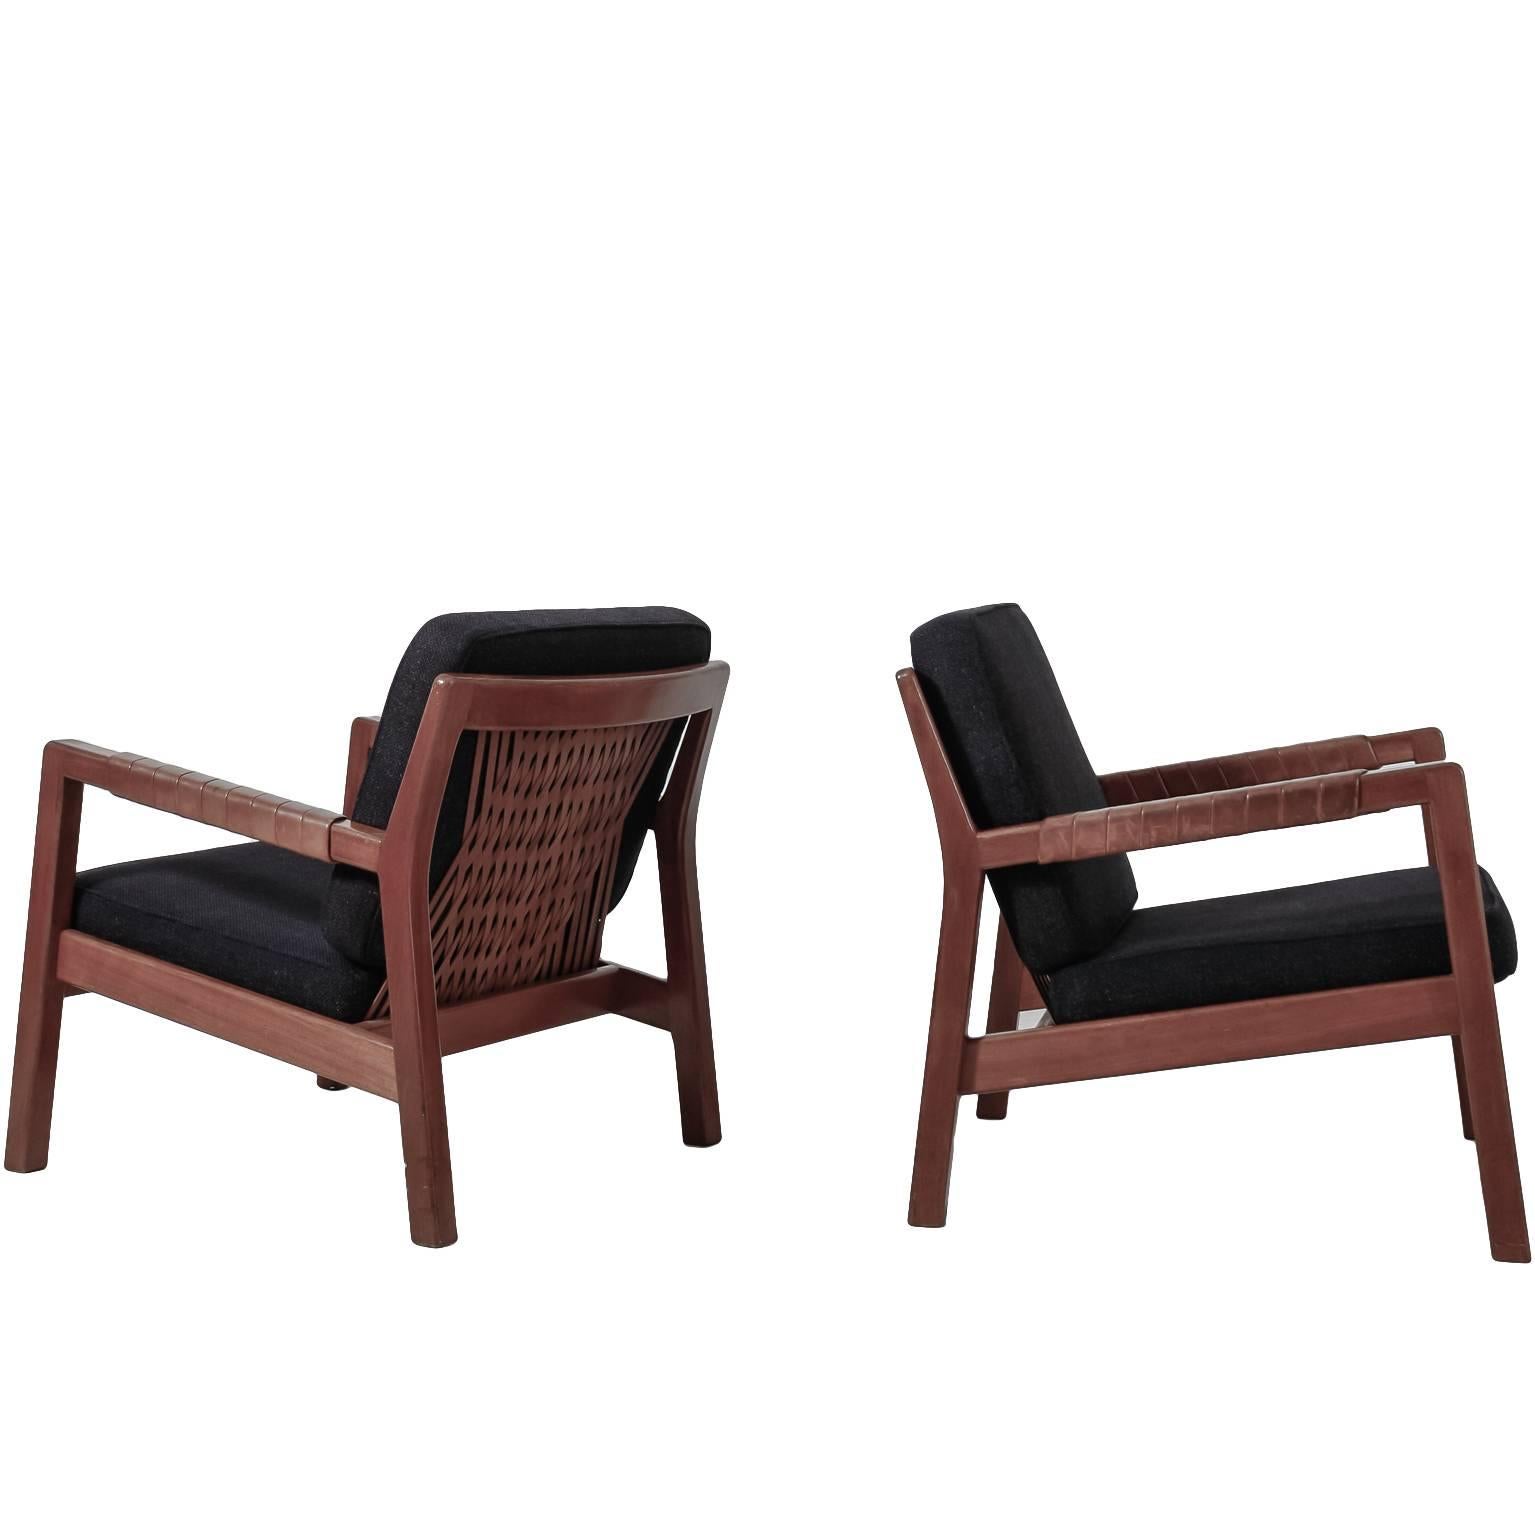 Carl-Gustav Hiort af Ornäs Pair Oak and Leather Armchairs, Finland, 1950s For Sale